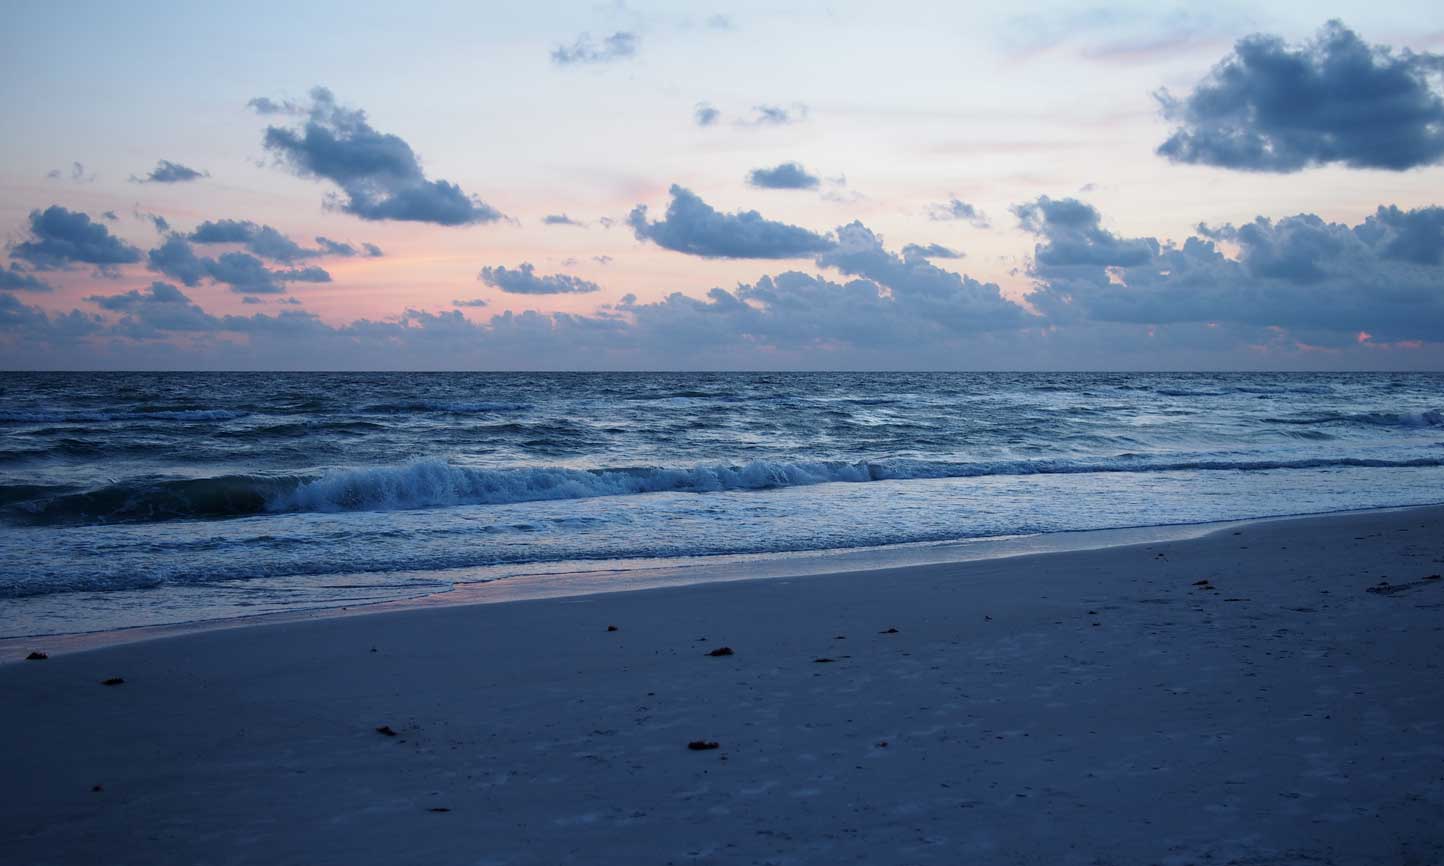 The swell coming in at Madeira Beach just after the sun went down.